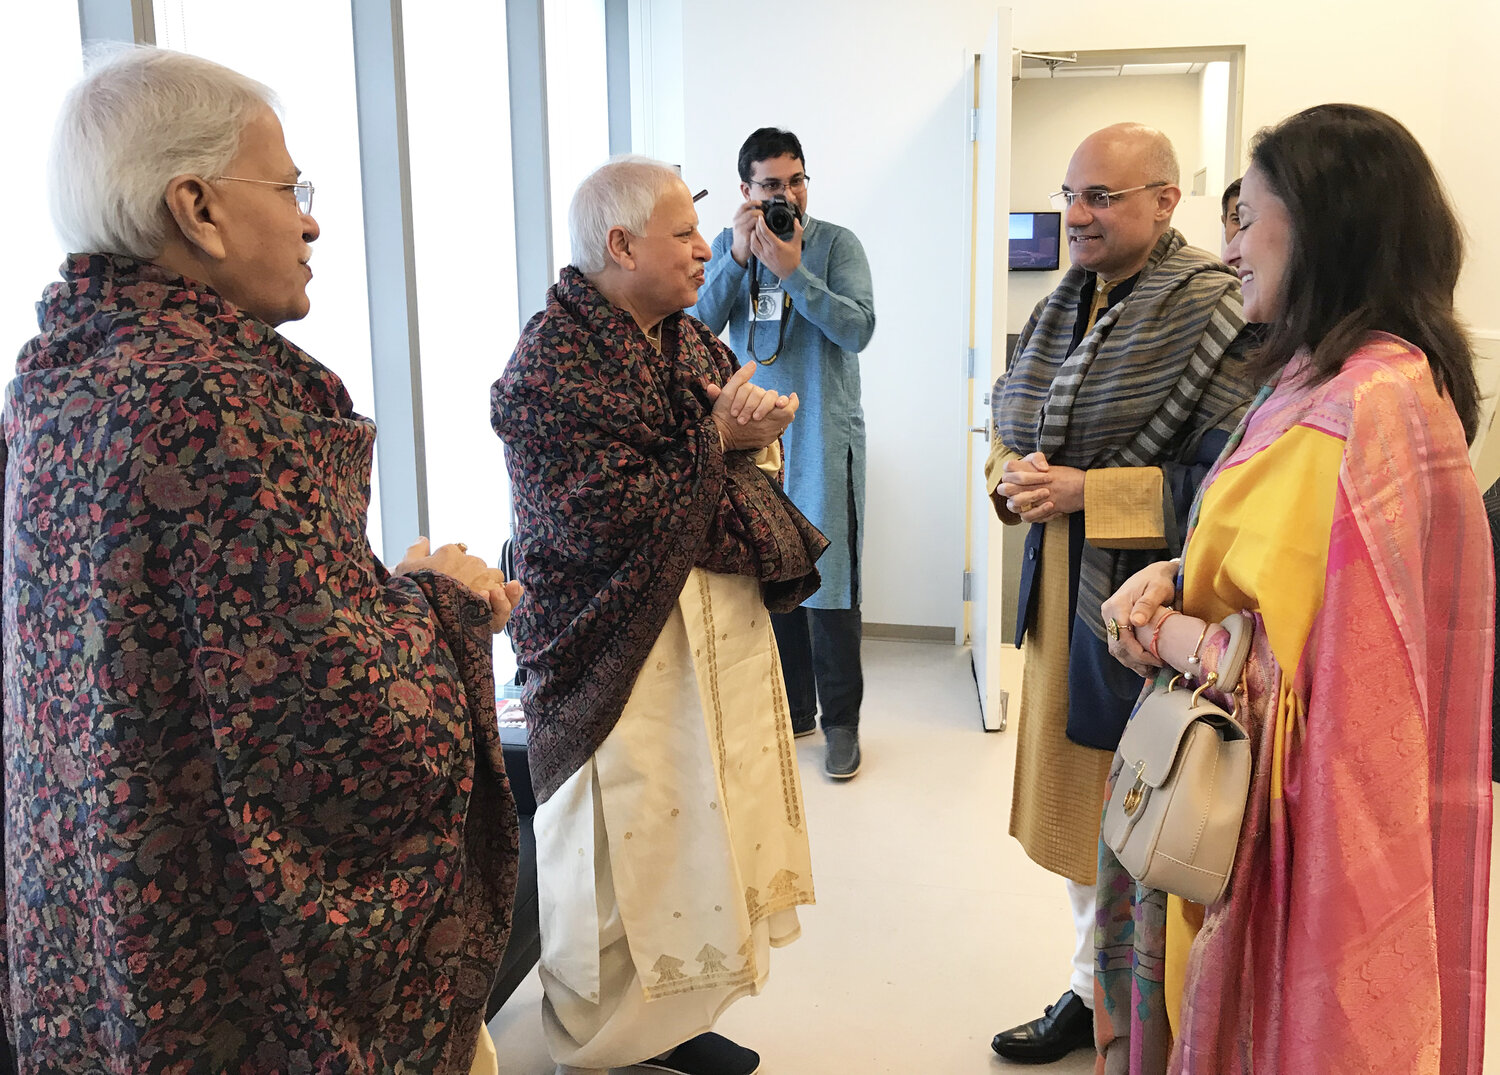 Nishant Parekh recording the Misra brothers with the then Consul General of India and his wife in 2018.